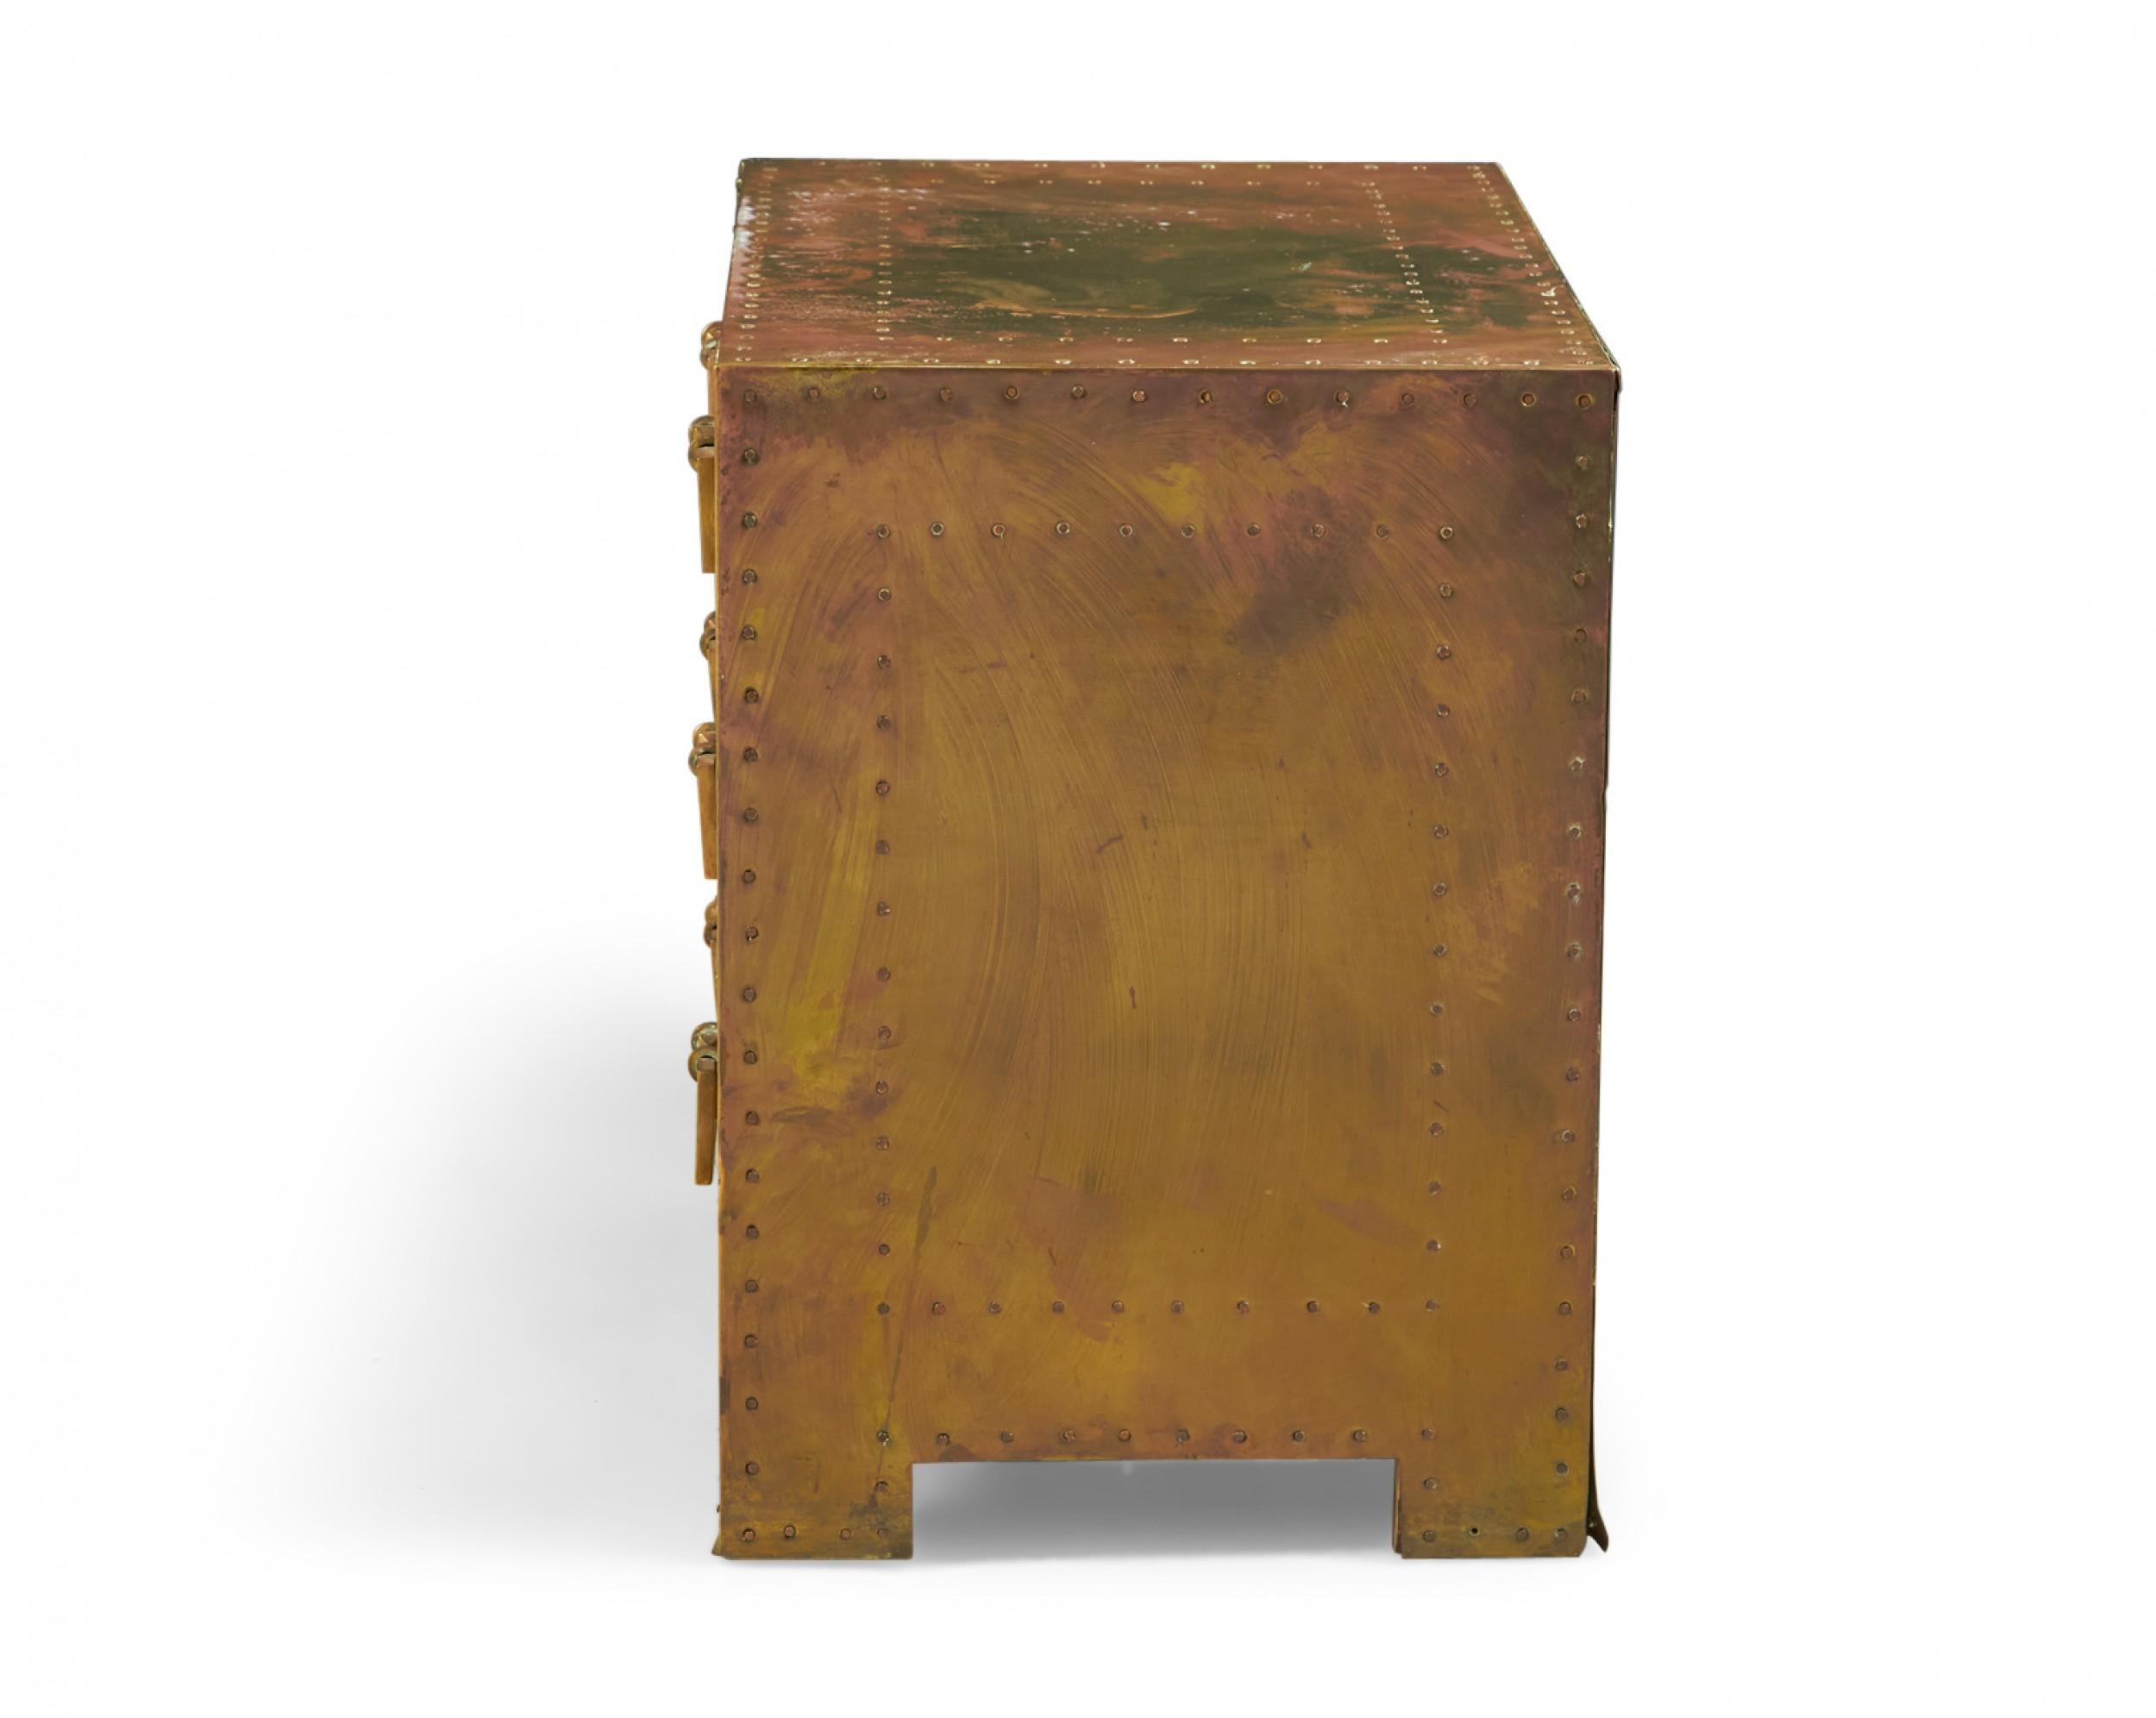 Spanish high style 'Strongbox' bedside table / commode with brass-clad exterior with natural patina, copper studs, and three drawers with rectangular brass pulls. (SARREID, LTD.)(Similar pieces available with different patinas: DUF0025A-D, similar